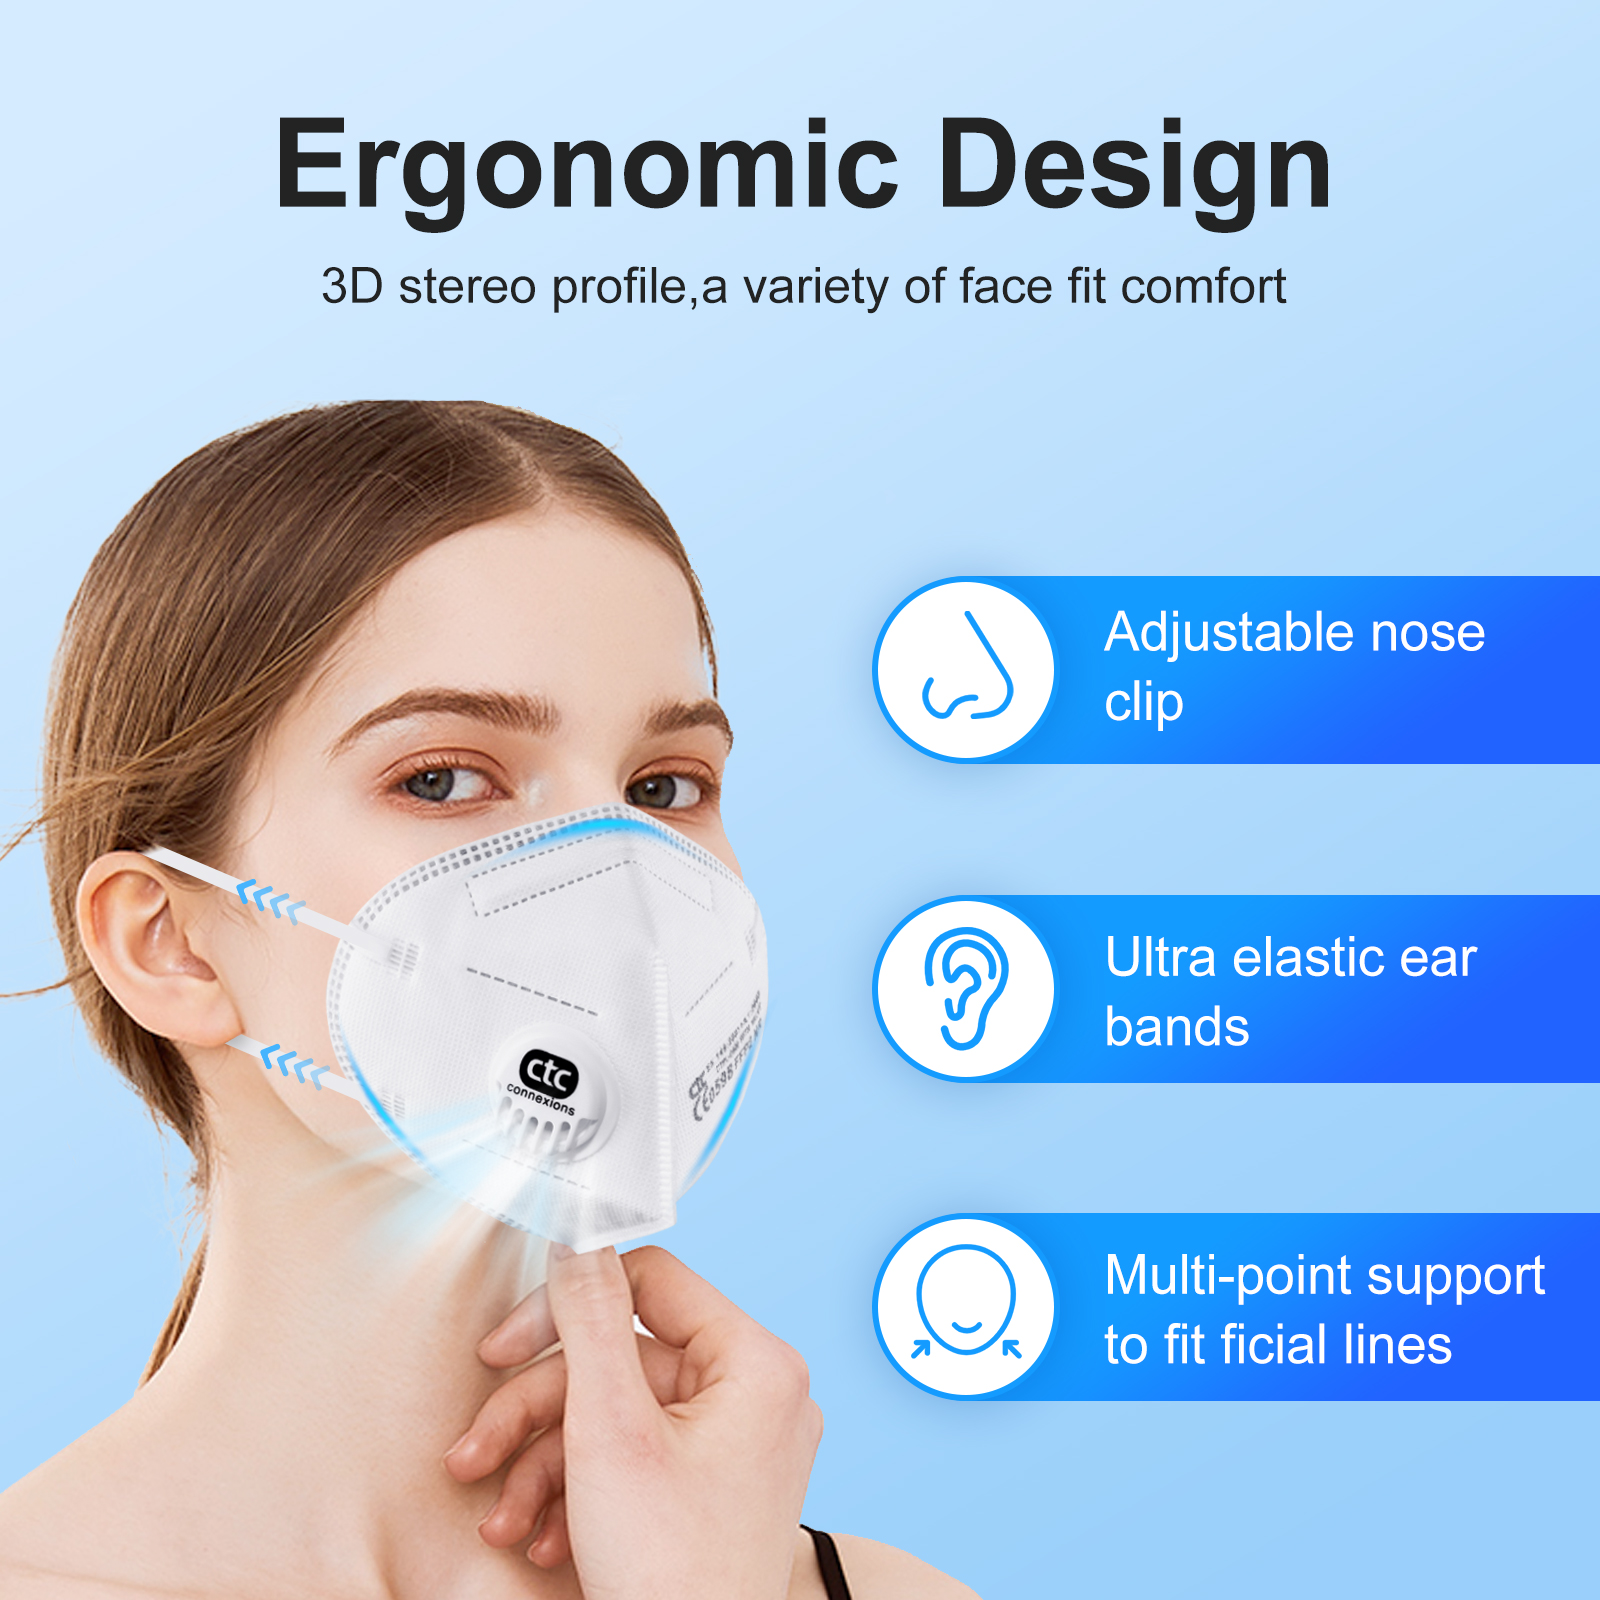 White 5 Layers FFP2 Disposable Face Mask with Valve